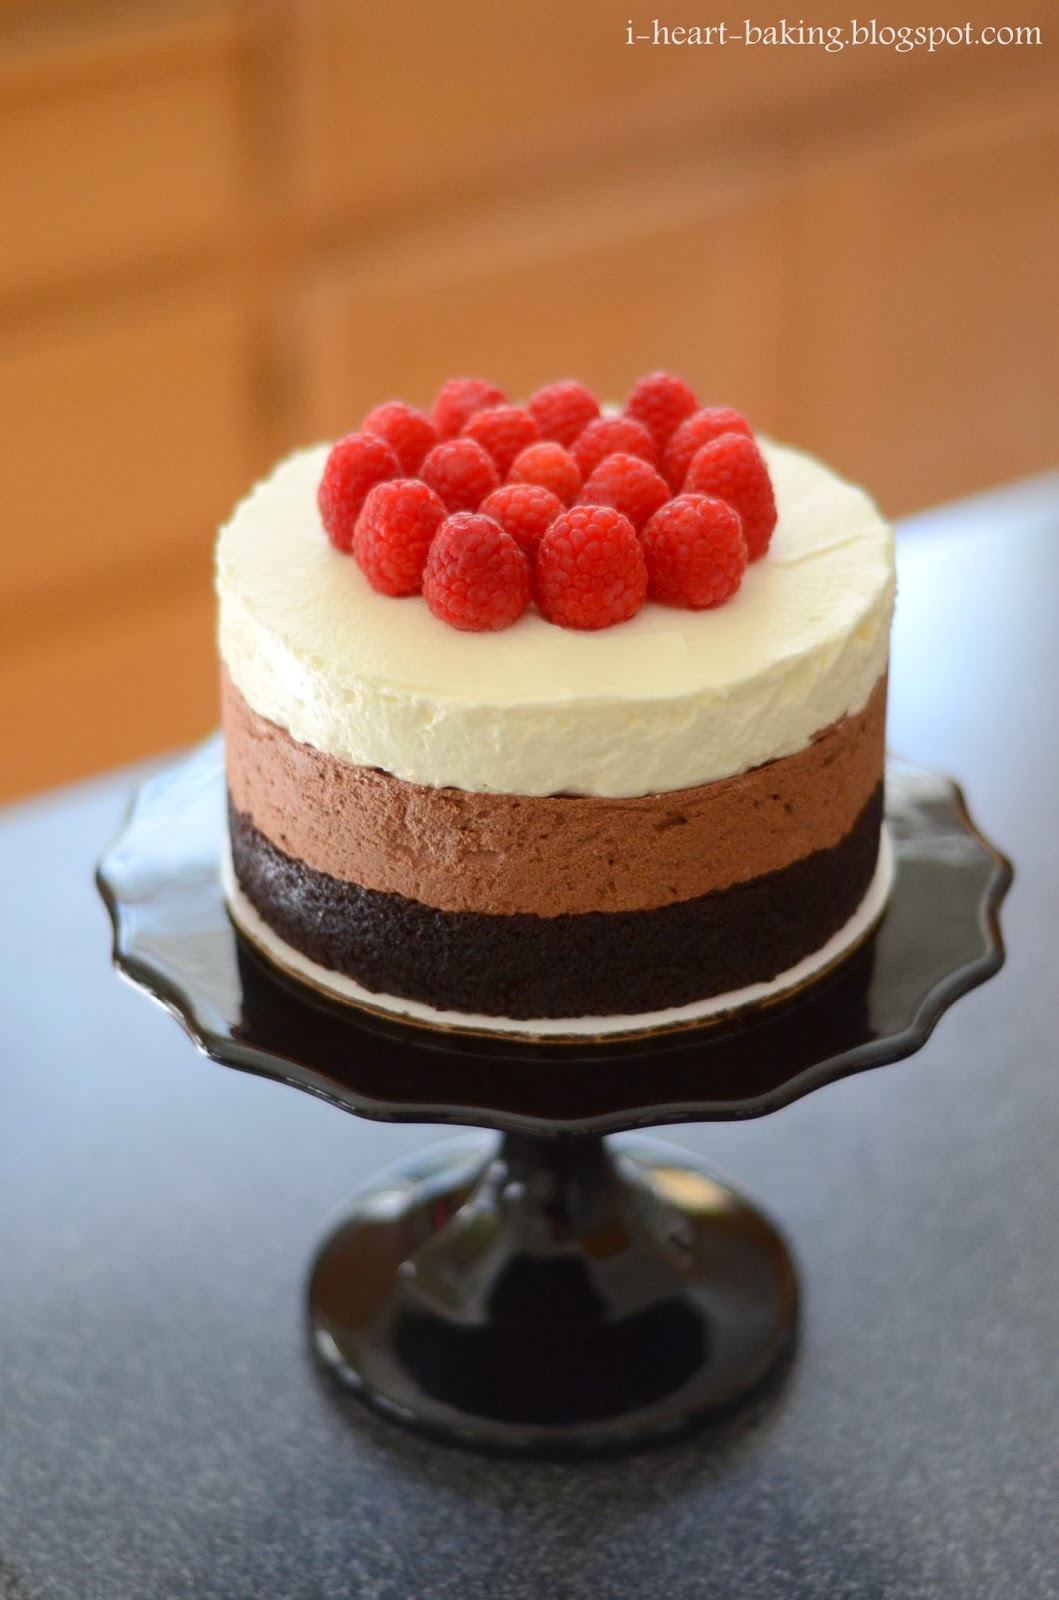 i heart baking!: two triple chocolate mousse cakes with raspberries